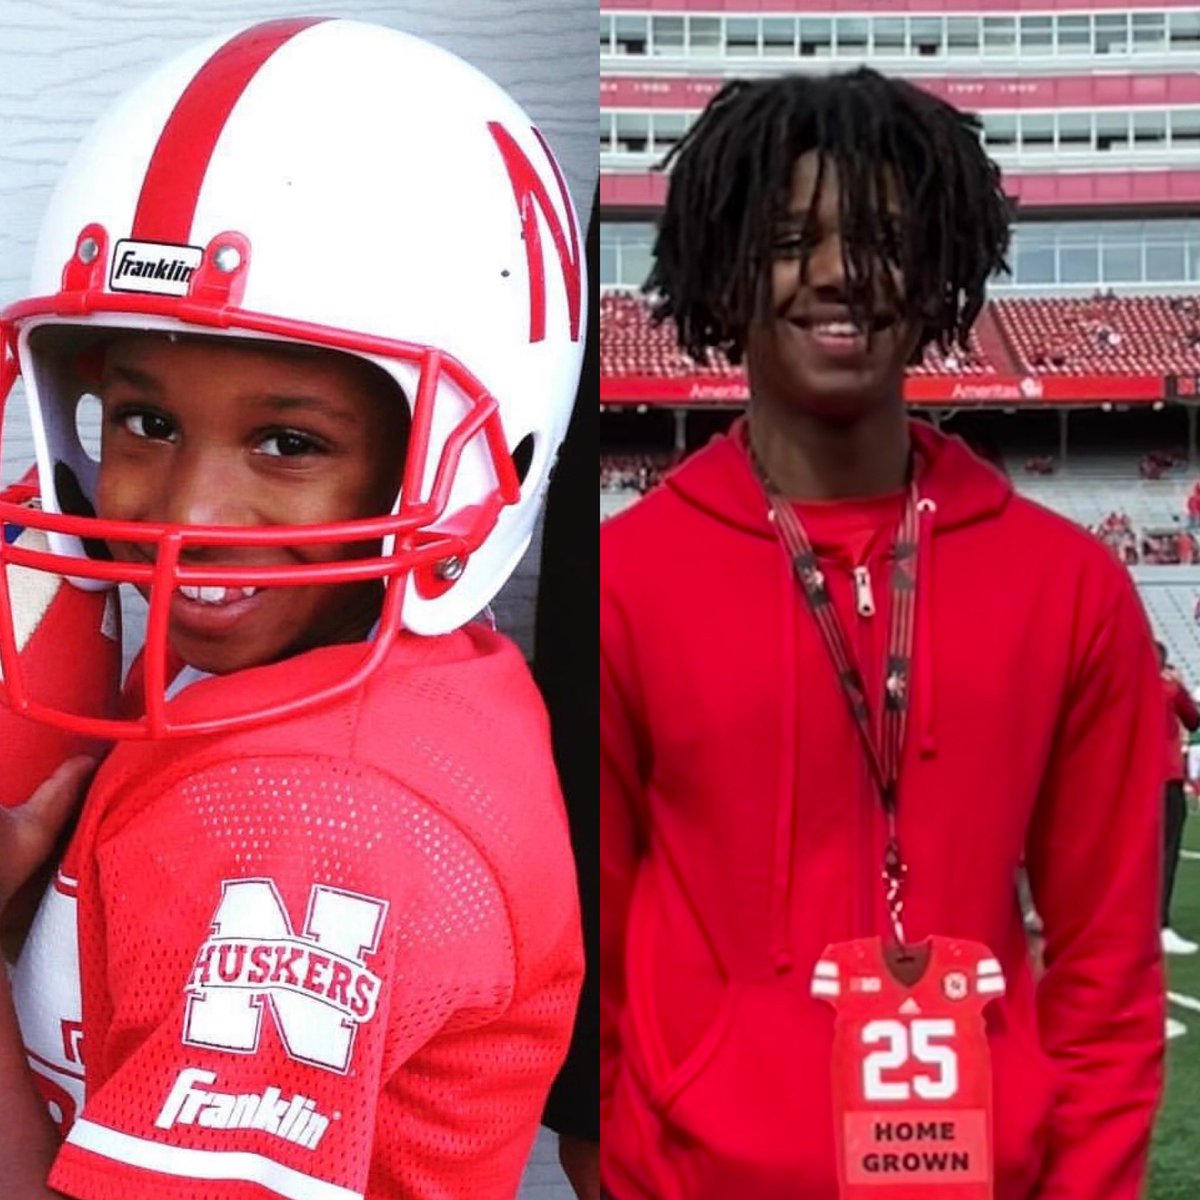 Keep shooting for the stars baby- you are limitless! @HuskerFootball  @HGMovement27 #najeebrown #Nebraskahomegrown #8thgrade